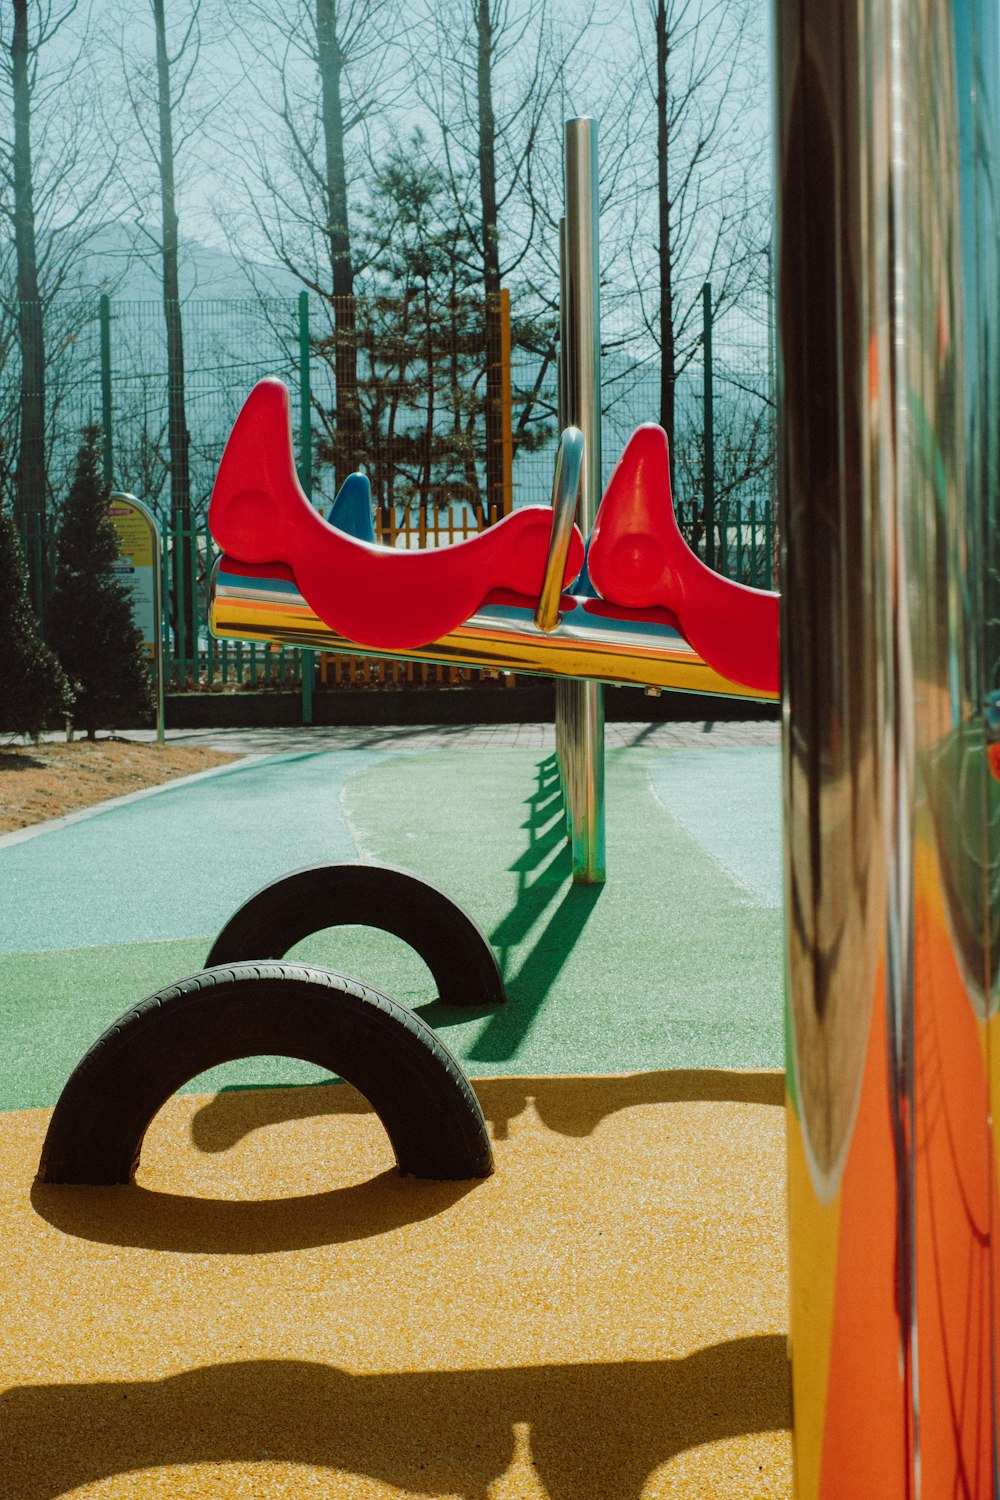 a children's play area in a park with a playground